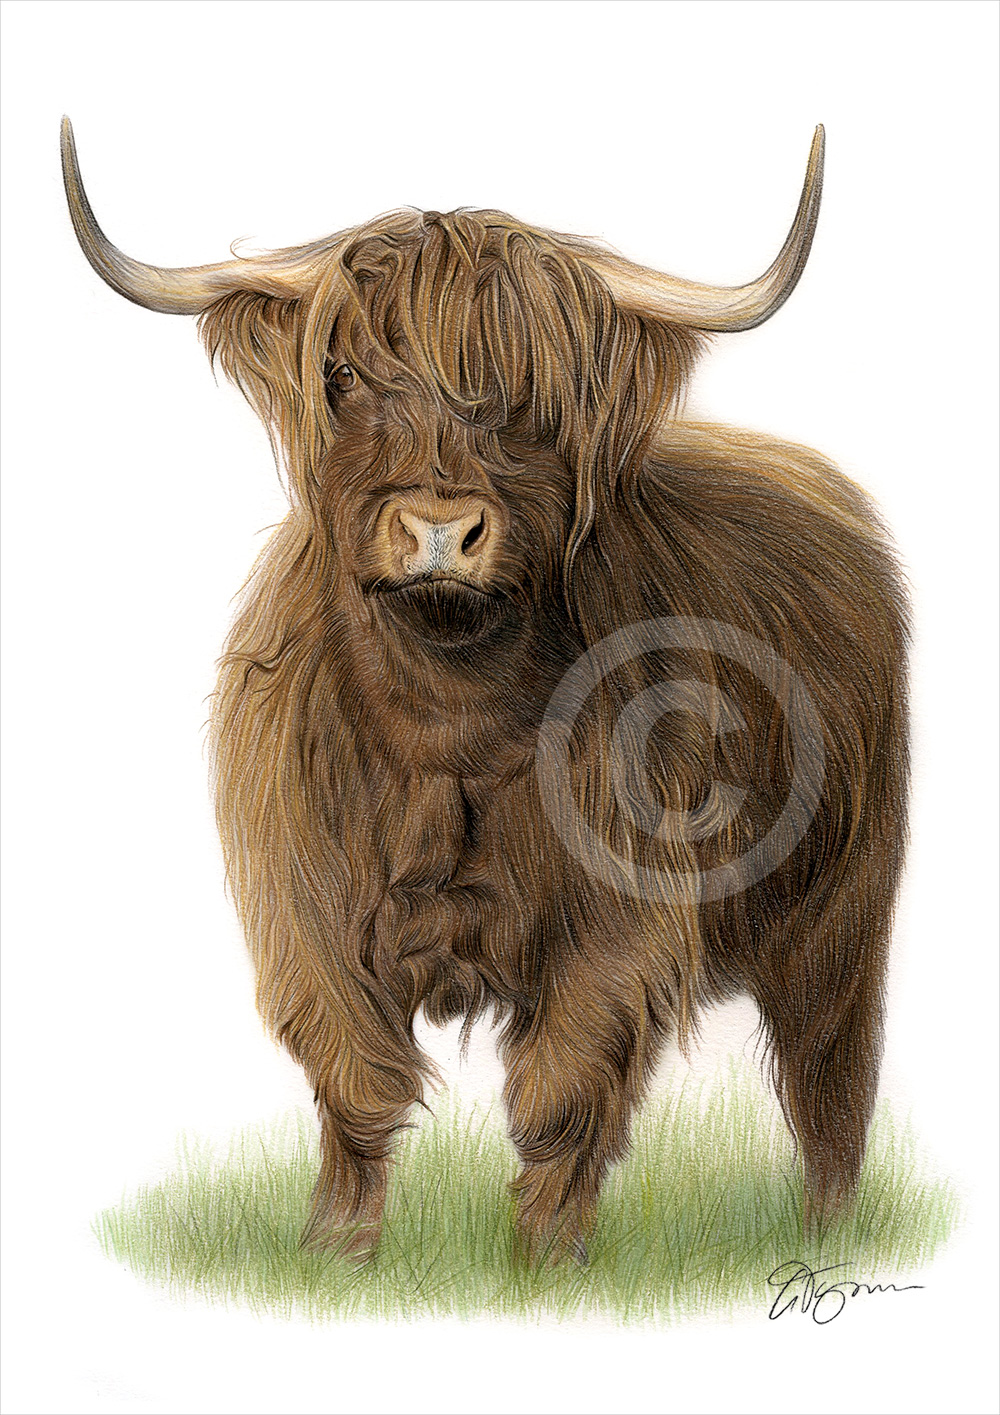 Pencil drawing commission of a highland cow by artist Gary Tymon